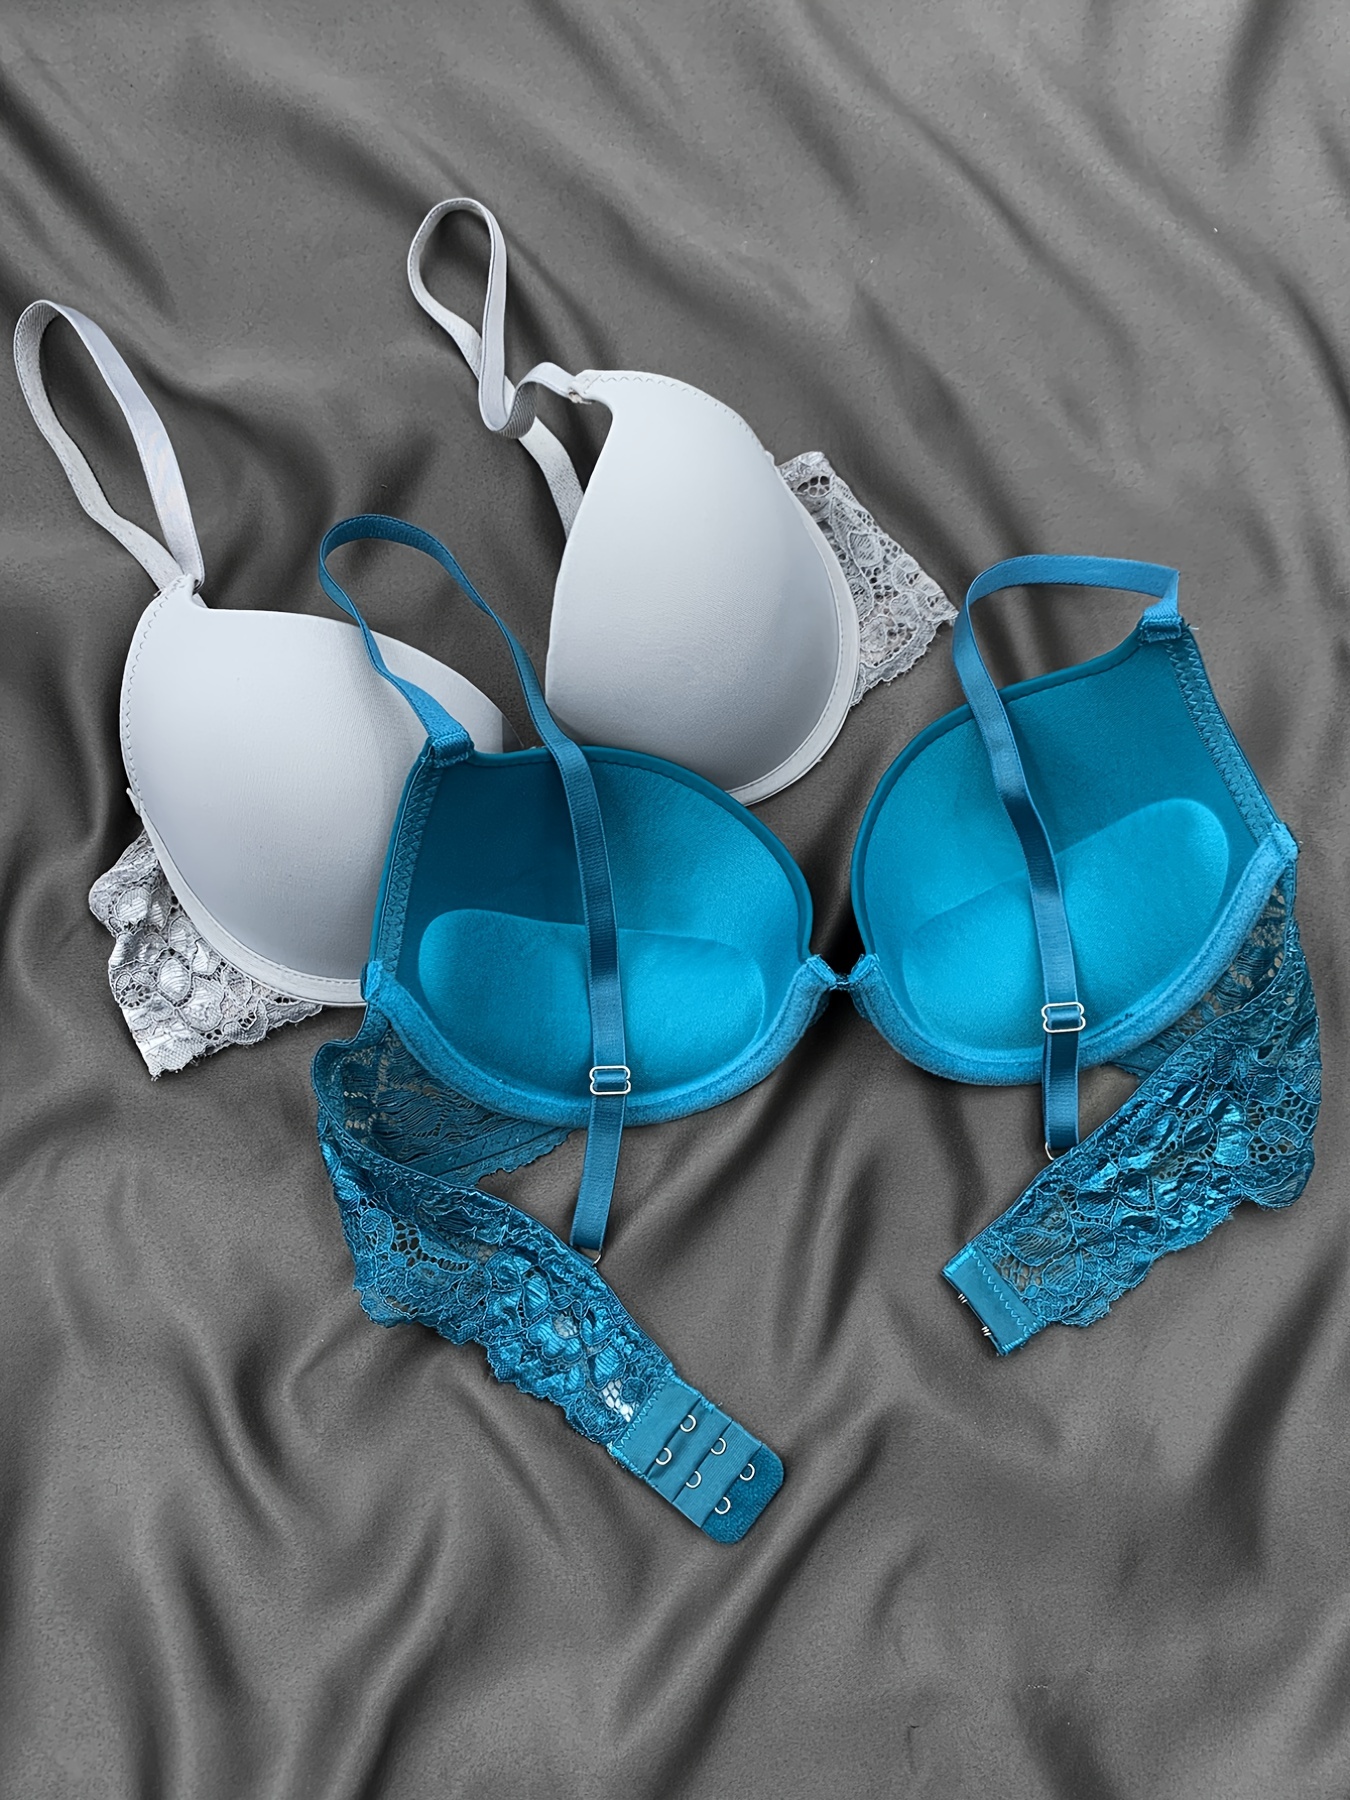 Ladies, get ready for lingerie that looks good and feels good! Shop  seamfree bralettes from 119.95, and 3-pack seamfree panties from 129.95,  sizes